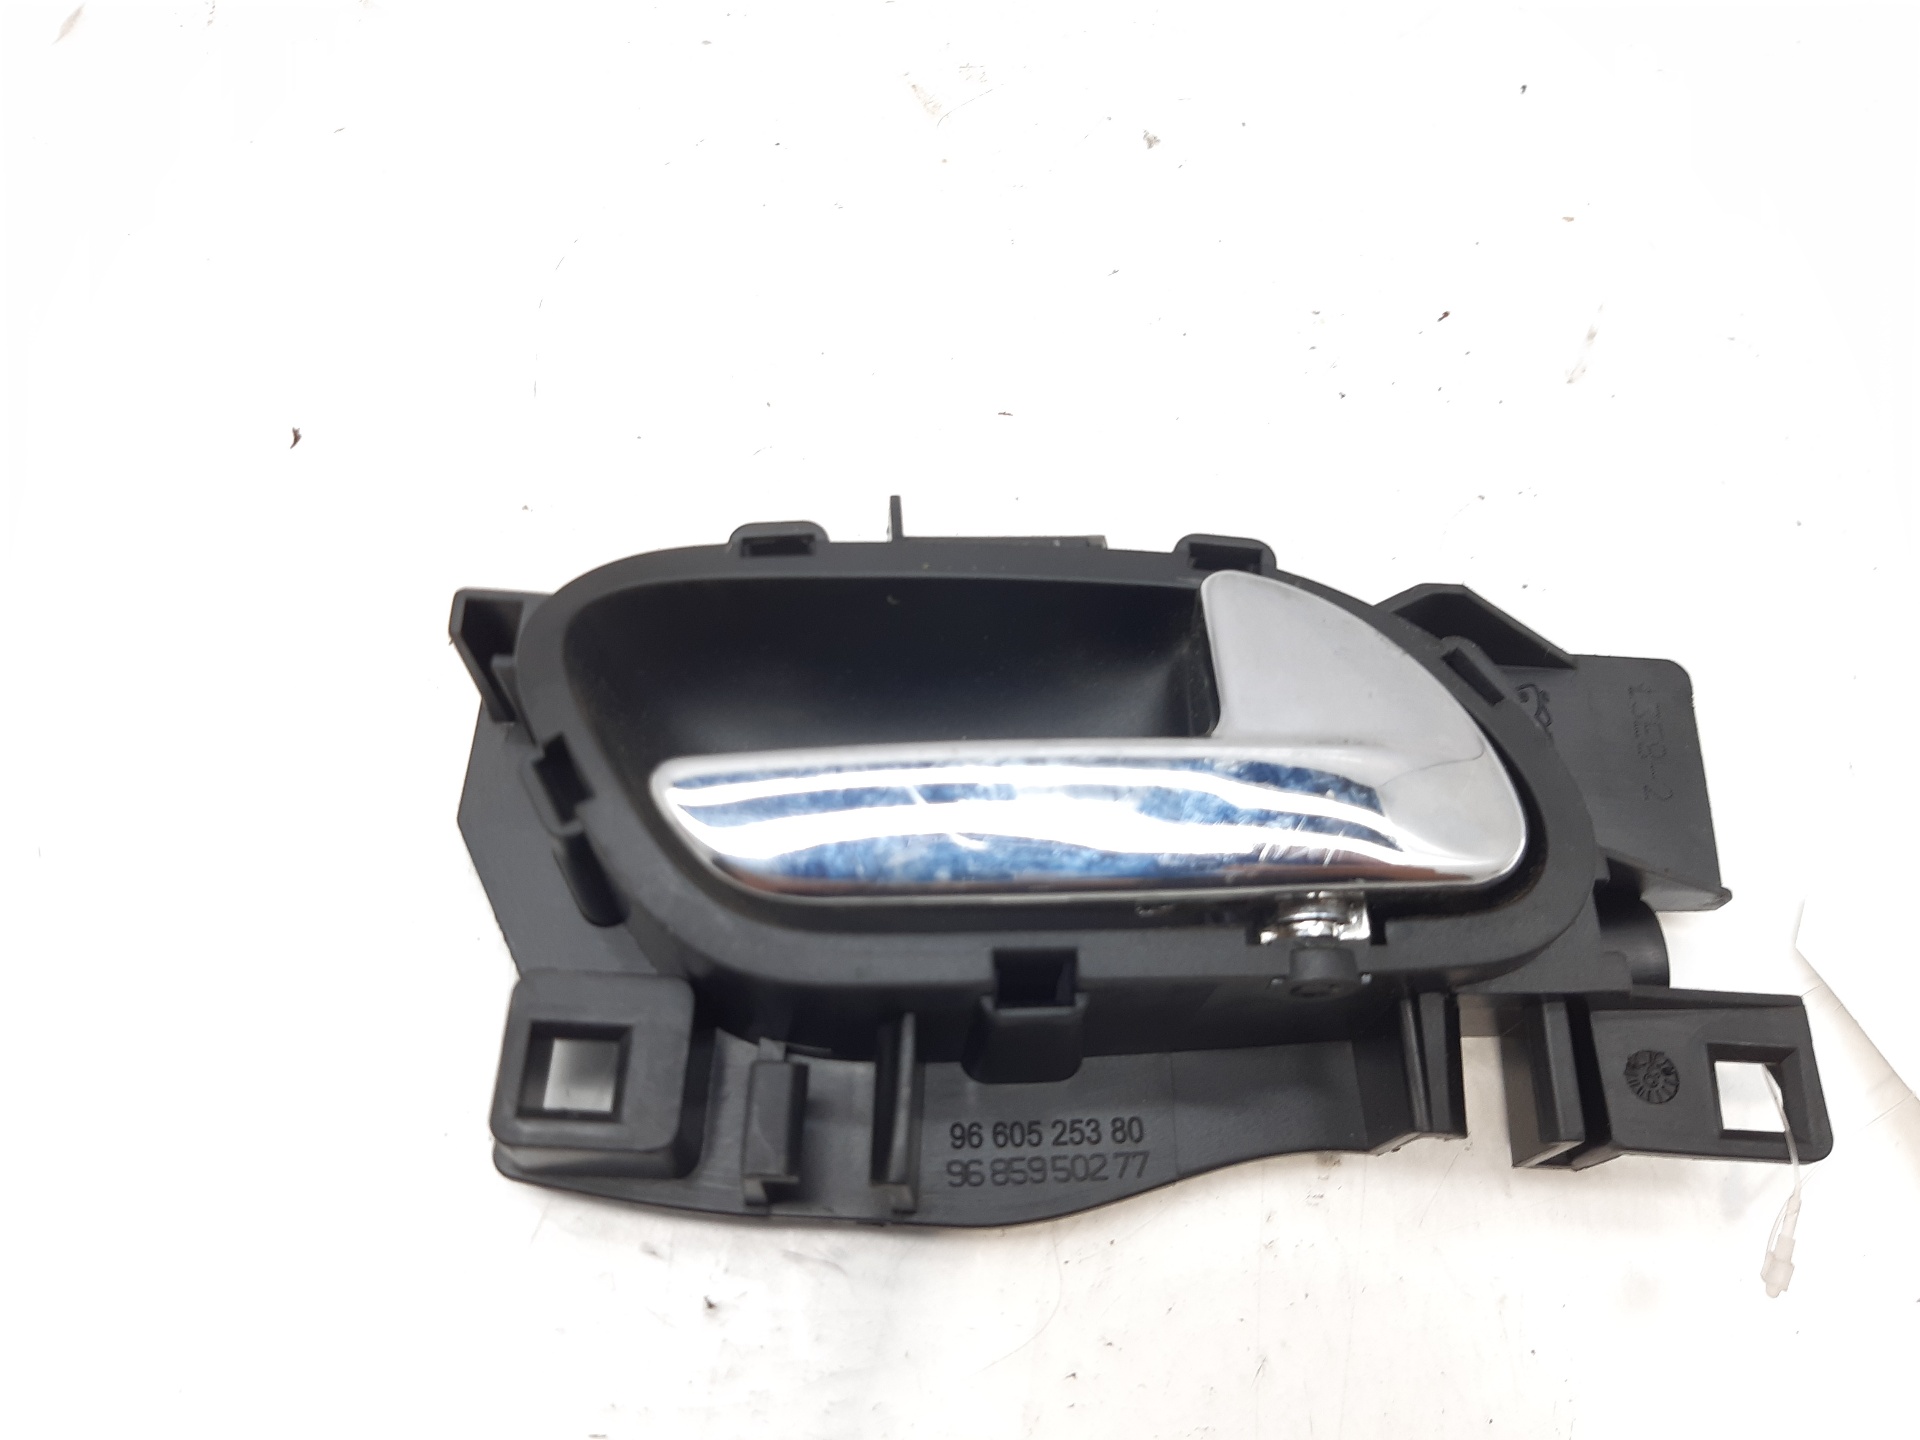 PEUGEOT 308 T7 (2007-2015) Right Rear Internal Opening Handle 9660525380 20145694